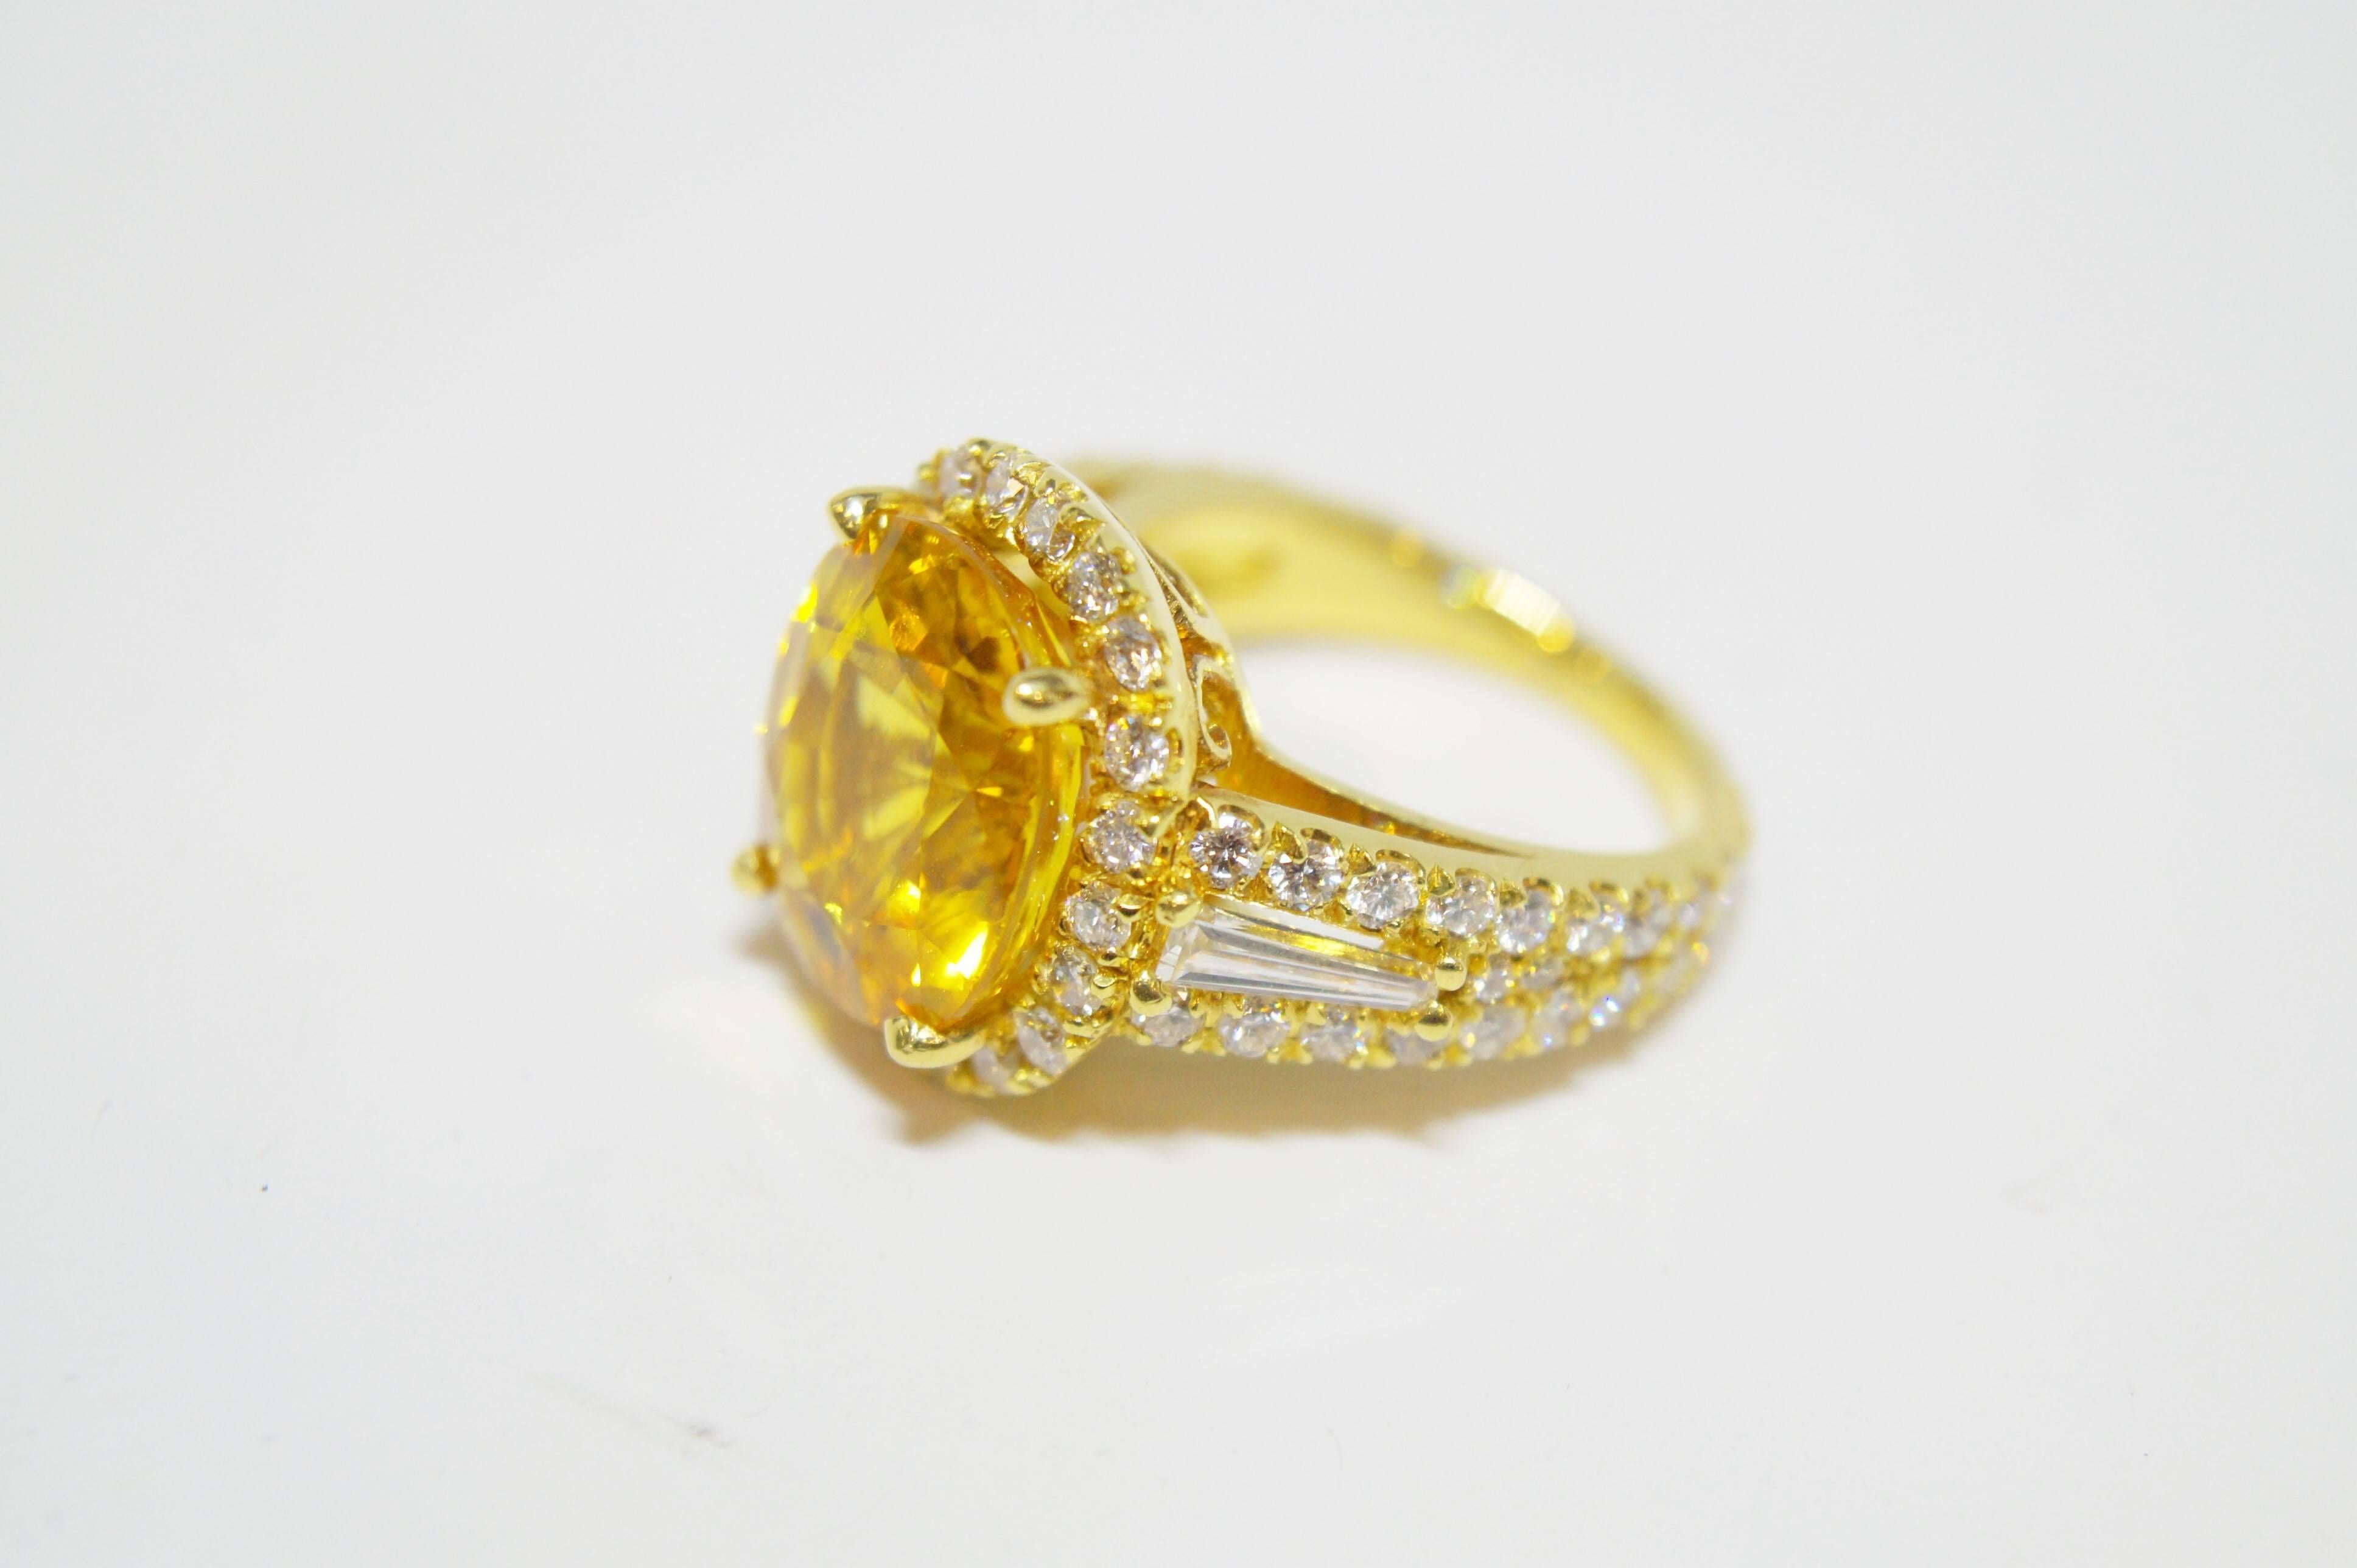 This beautiful ring showcases an exceptionally richly colored yellow sapphire weighing 10.82 cts. The ring also contains 68 full cut, 1.73 cts total weight approximately, G color, VS2 clarity, round diamonds in a halo design and tapering down the